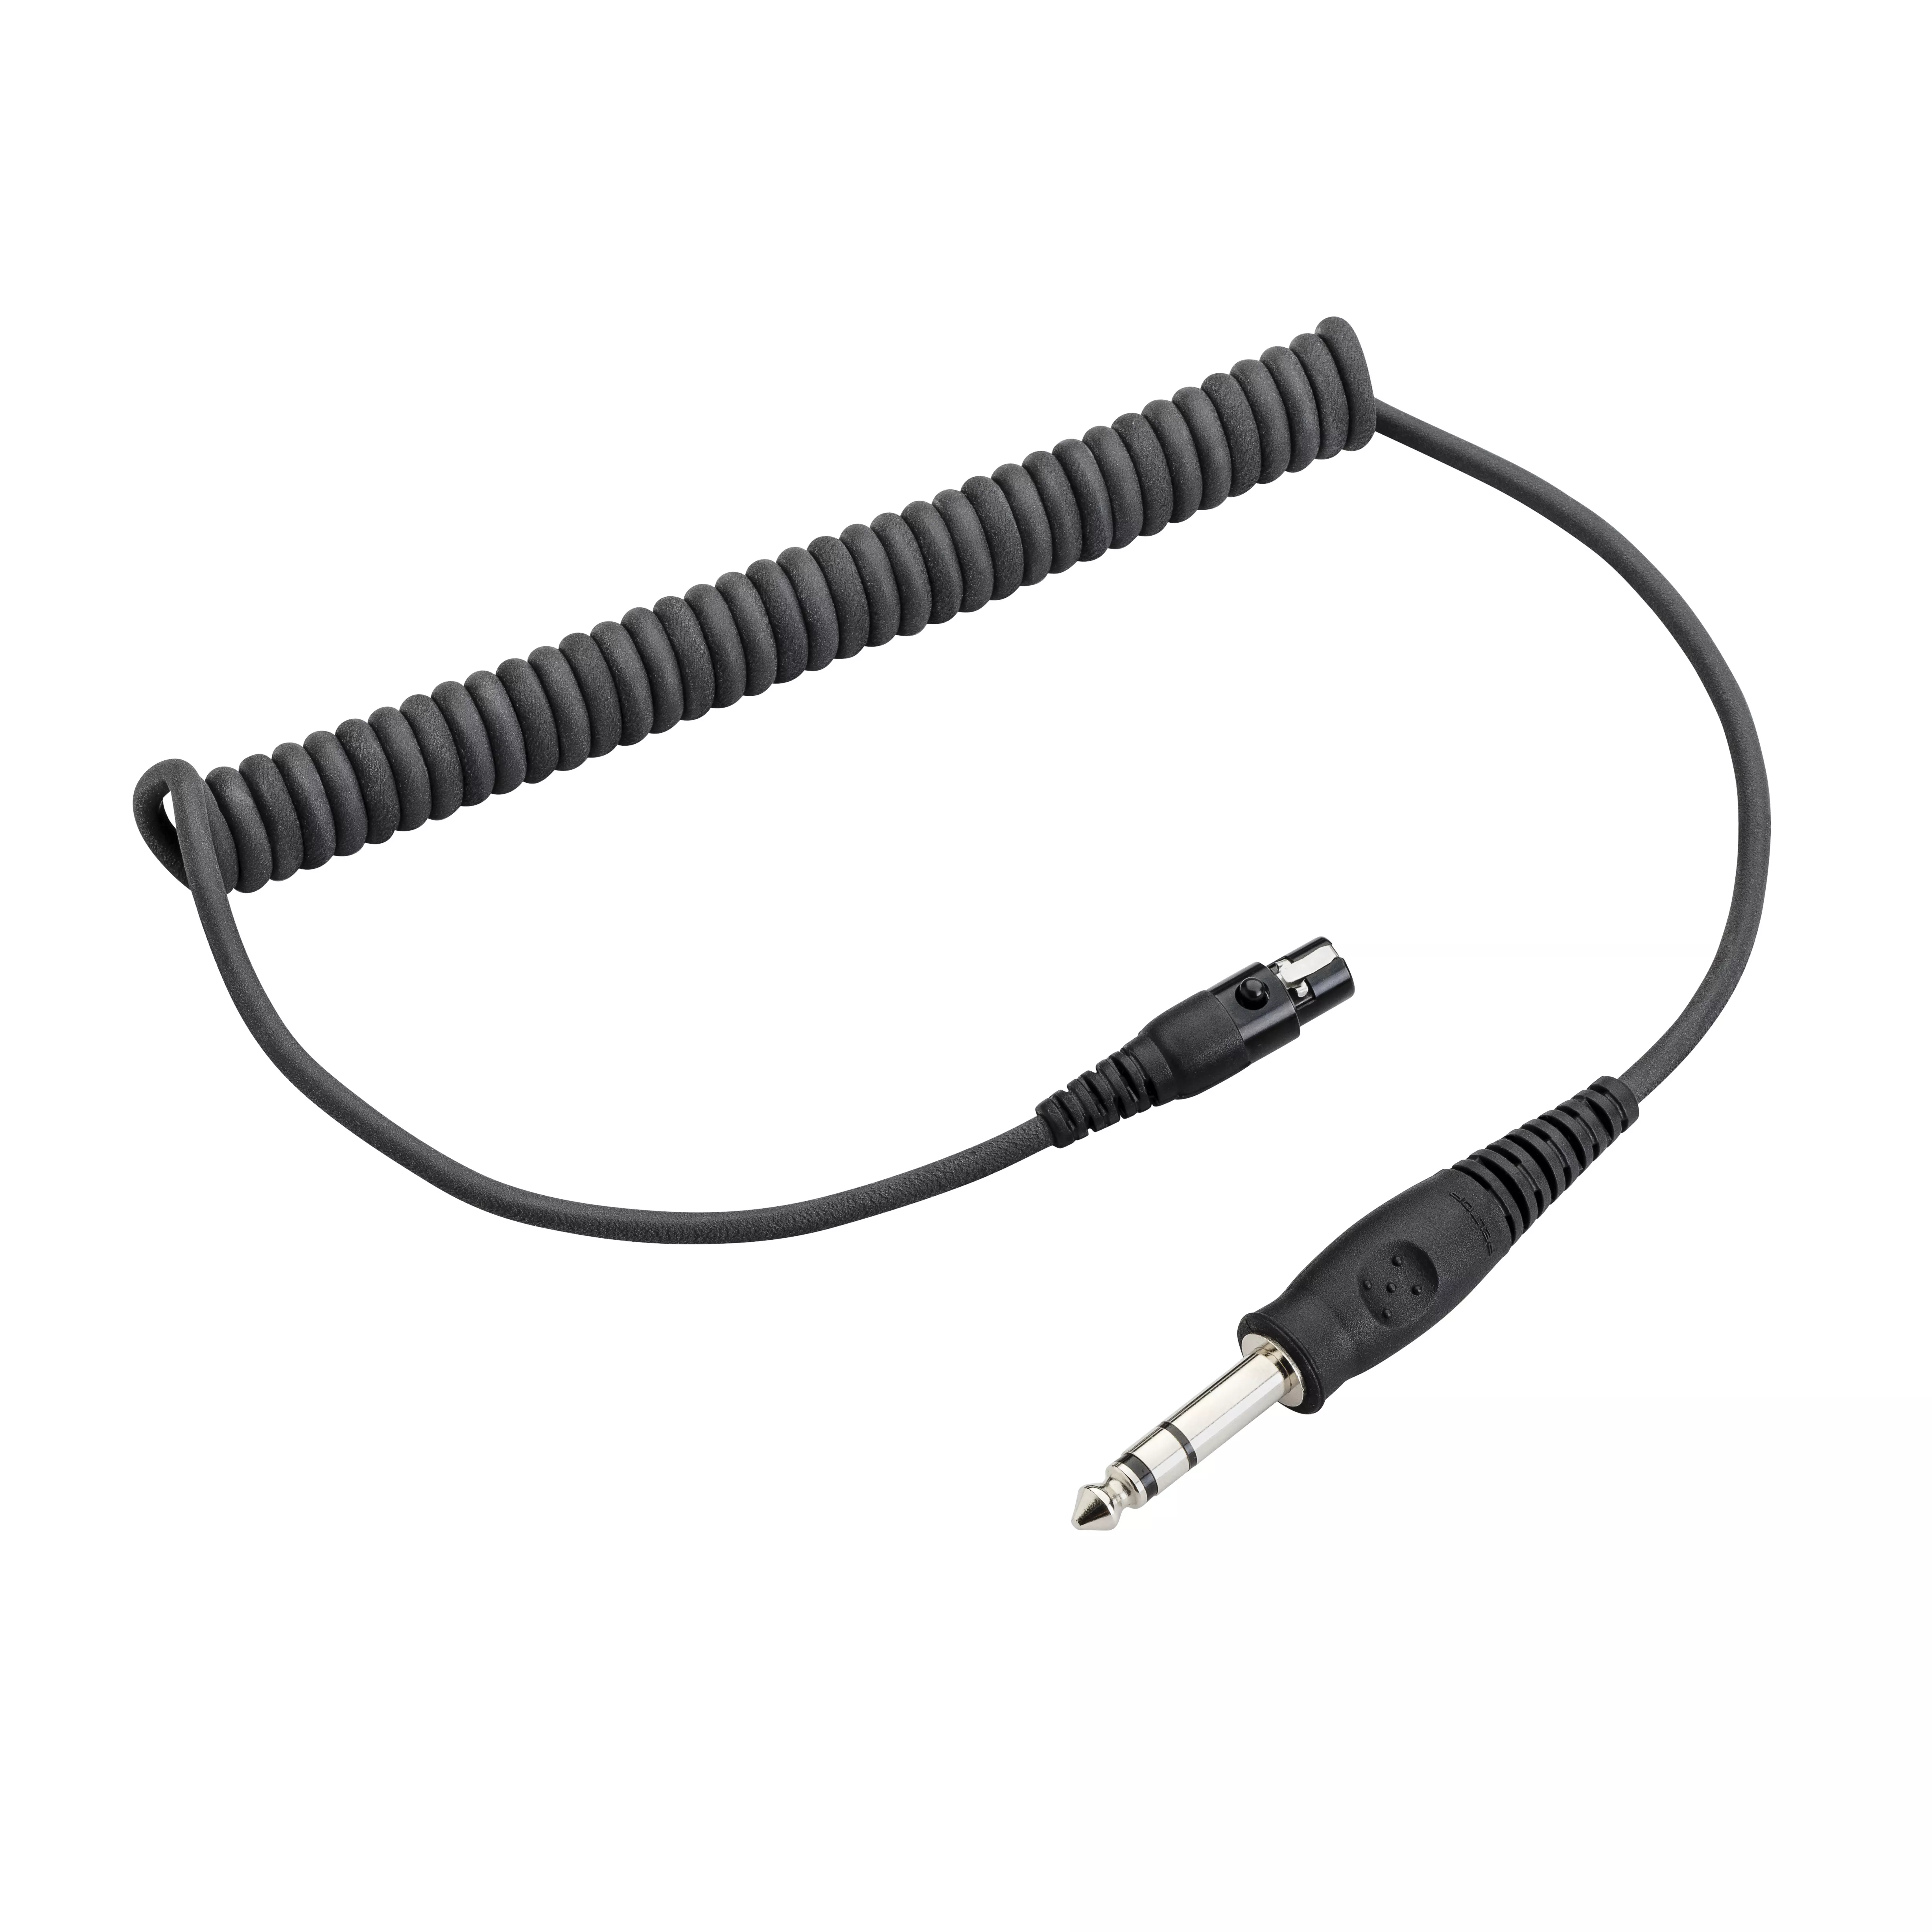 3M™ PELTOR™ FLX2 Cable FLX2-204, 1/4